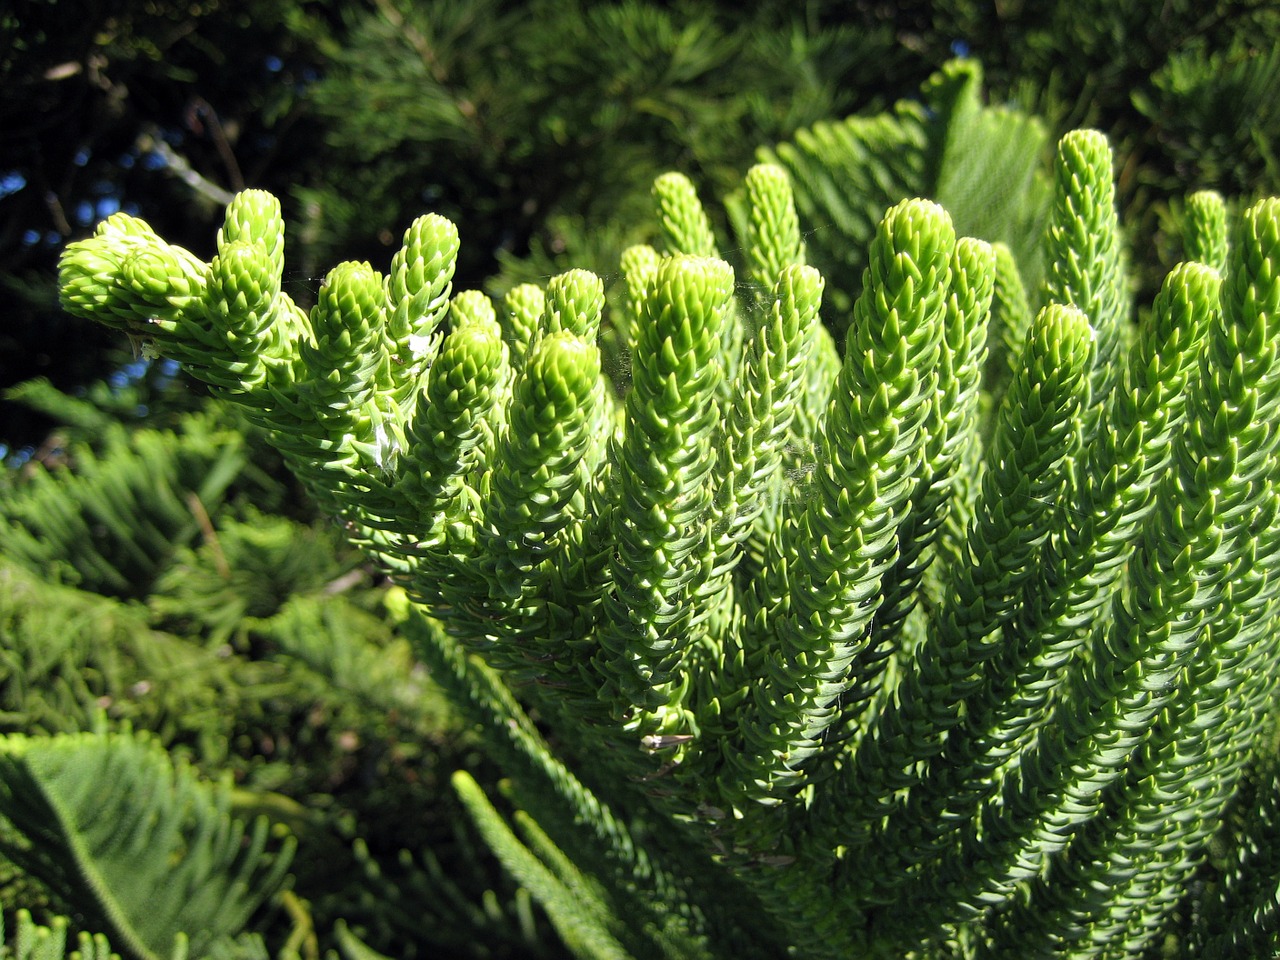 green branches norfolk pine or araucaria buds free photo